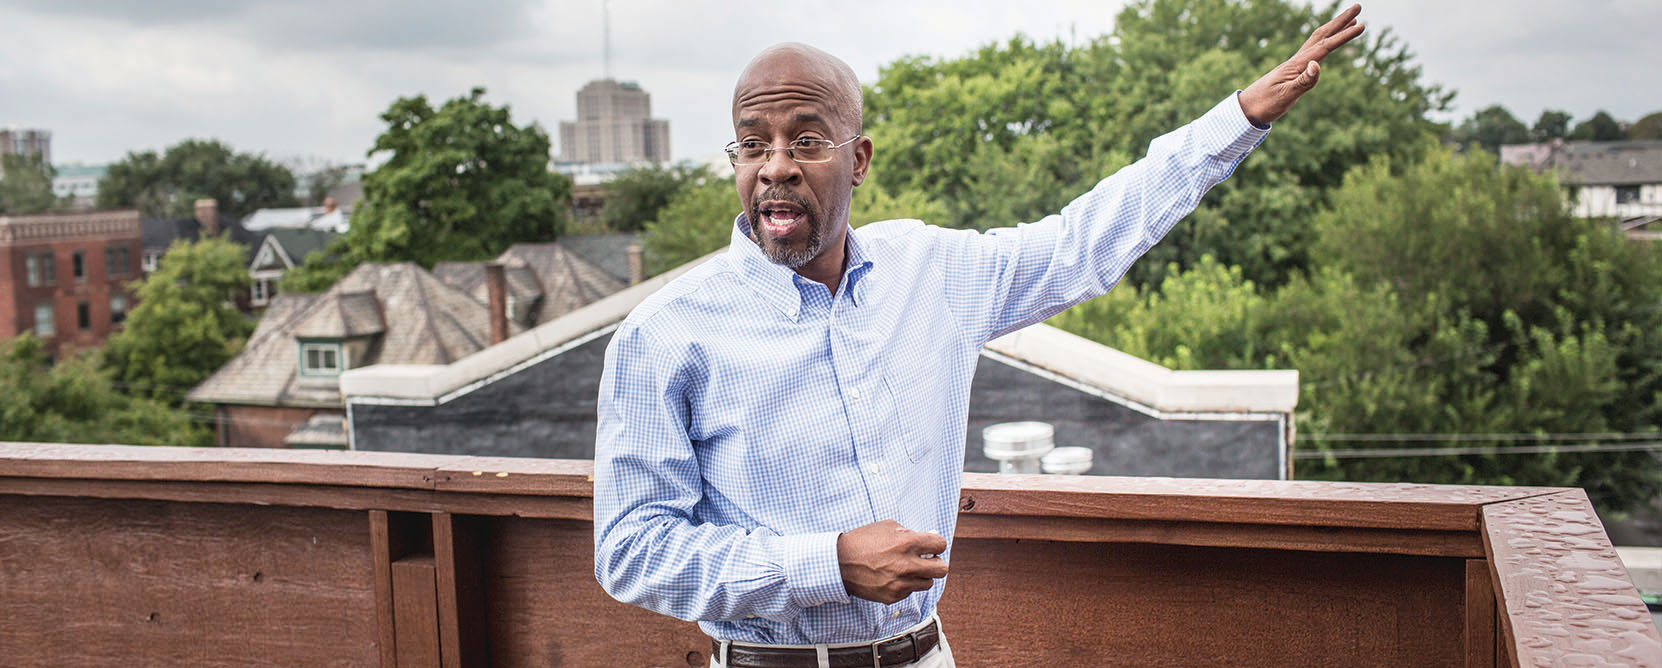 Richard Hosey poses on rooftop of building